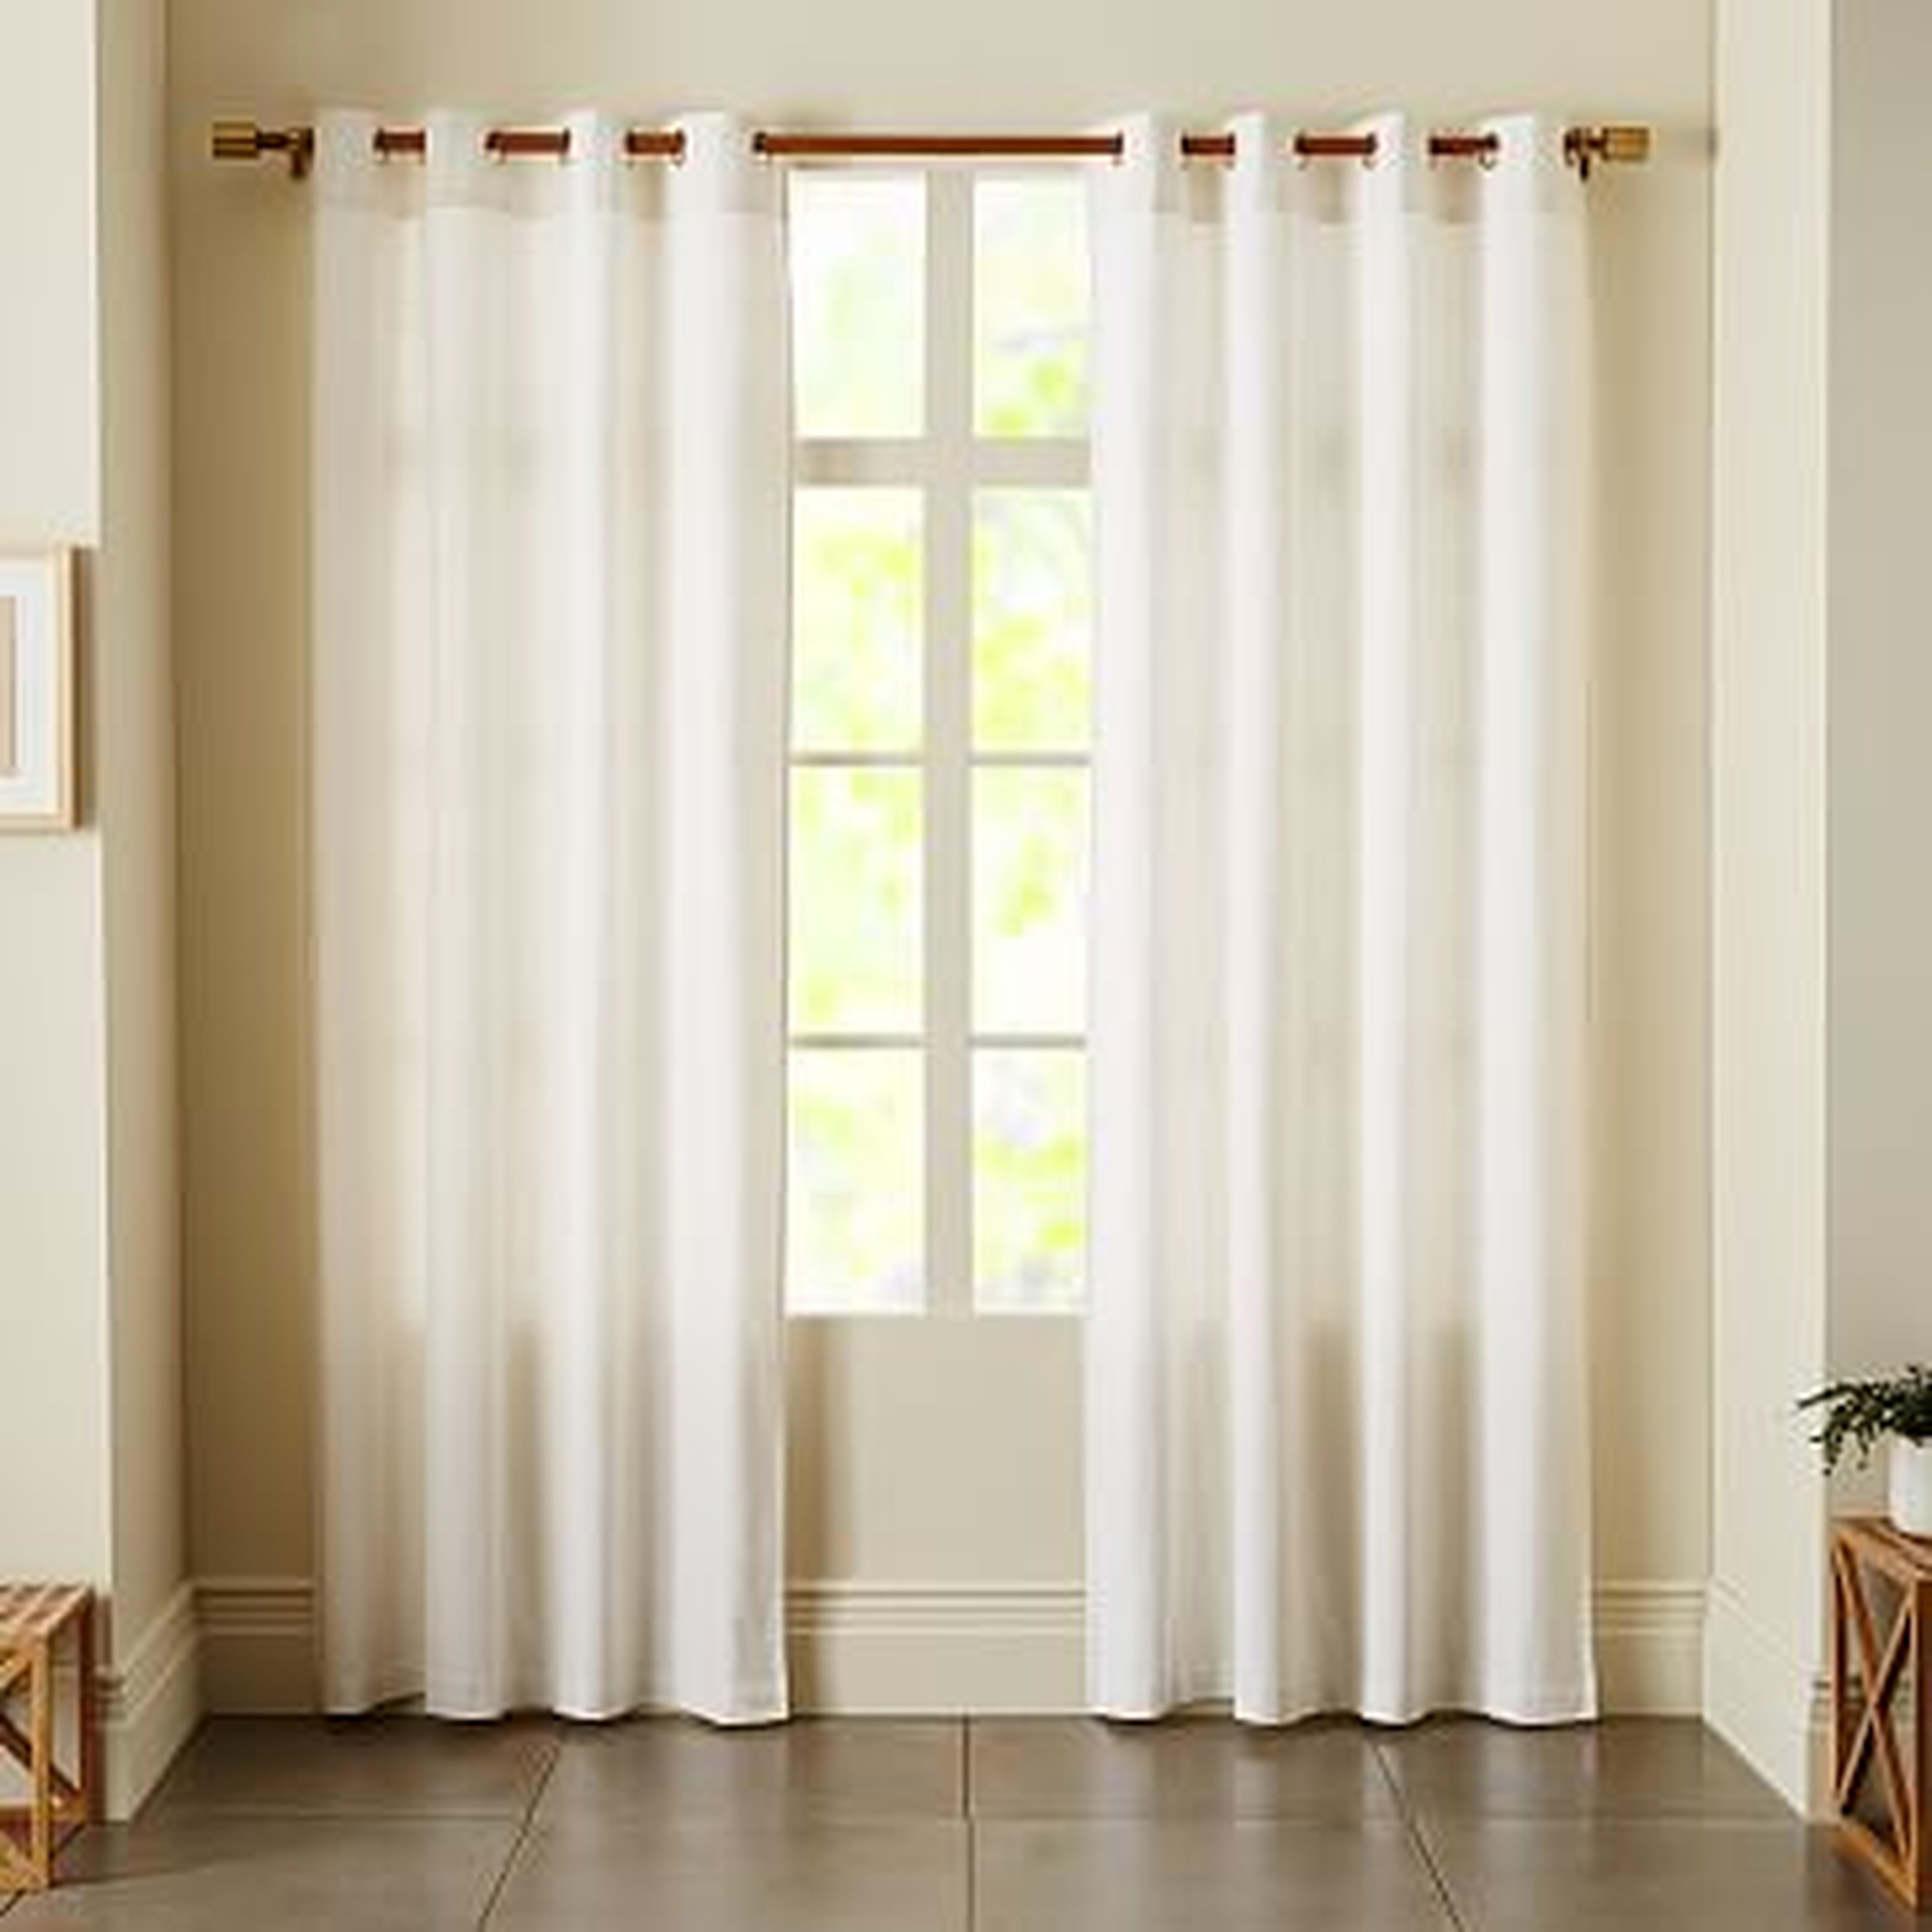 Opaque Linen Curtain With Grommets, 96", White - West Elm